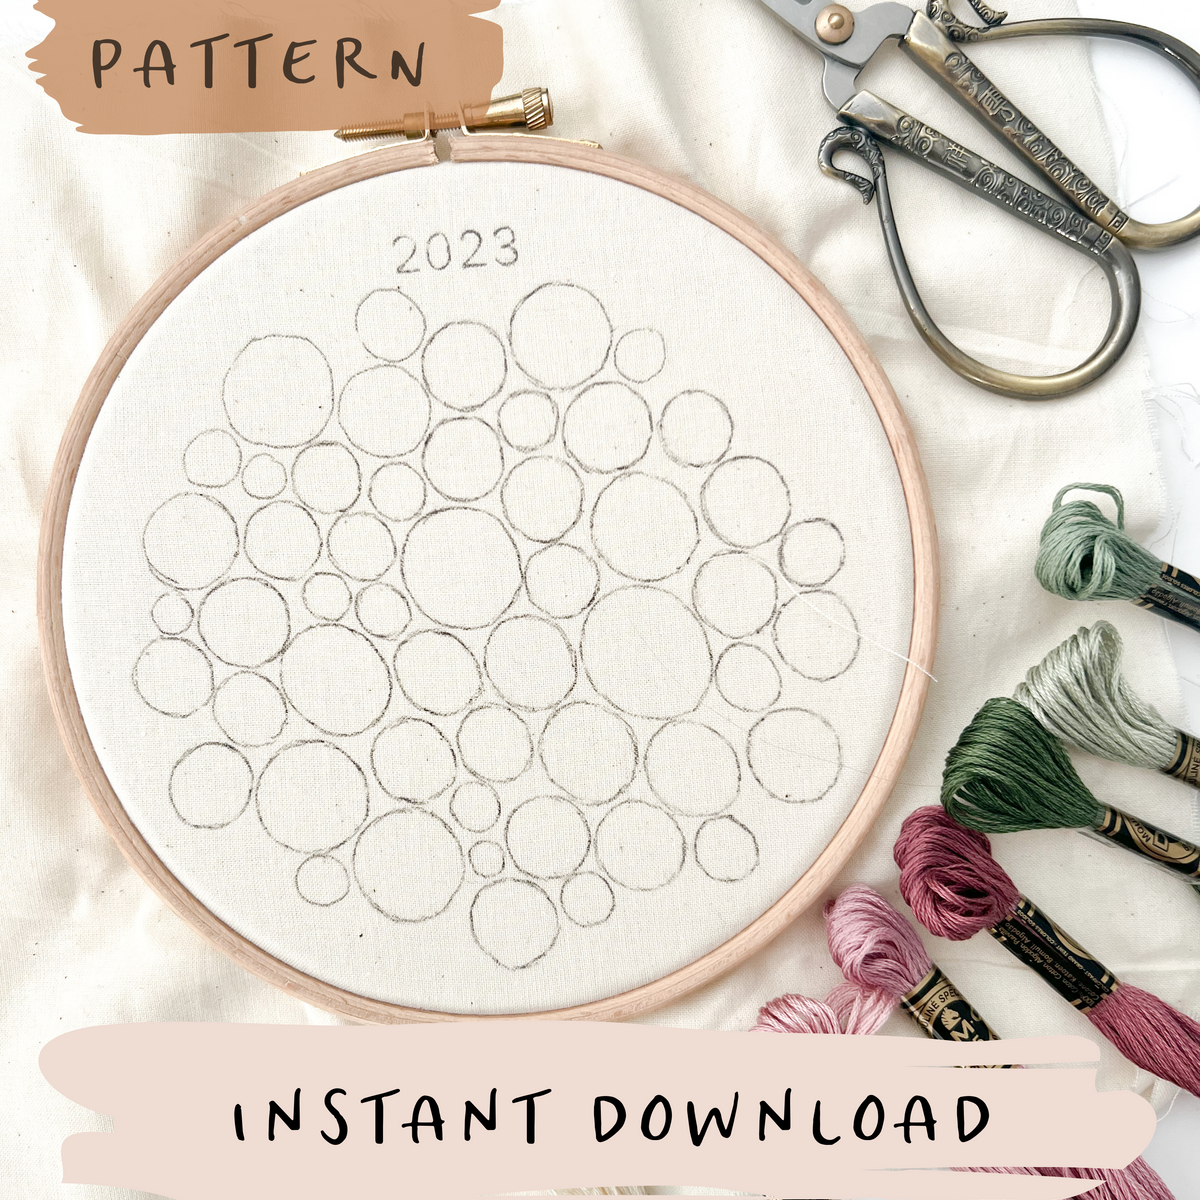 How To Choose Icon Size & Placement On Your Embroidery Journal